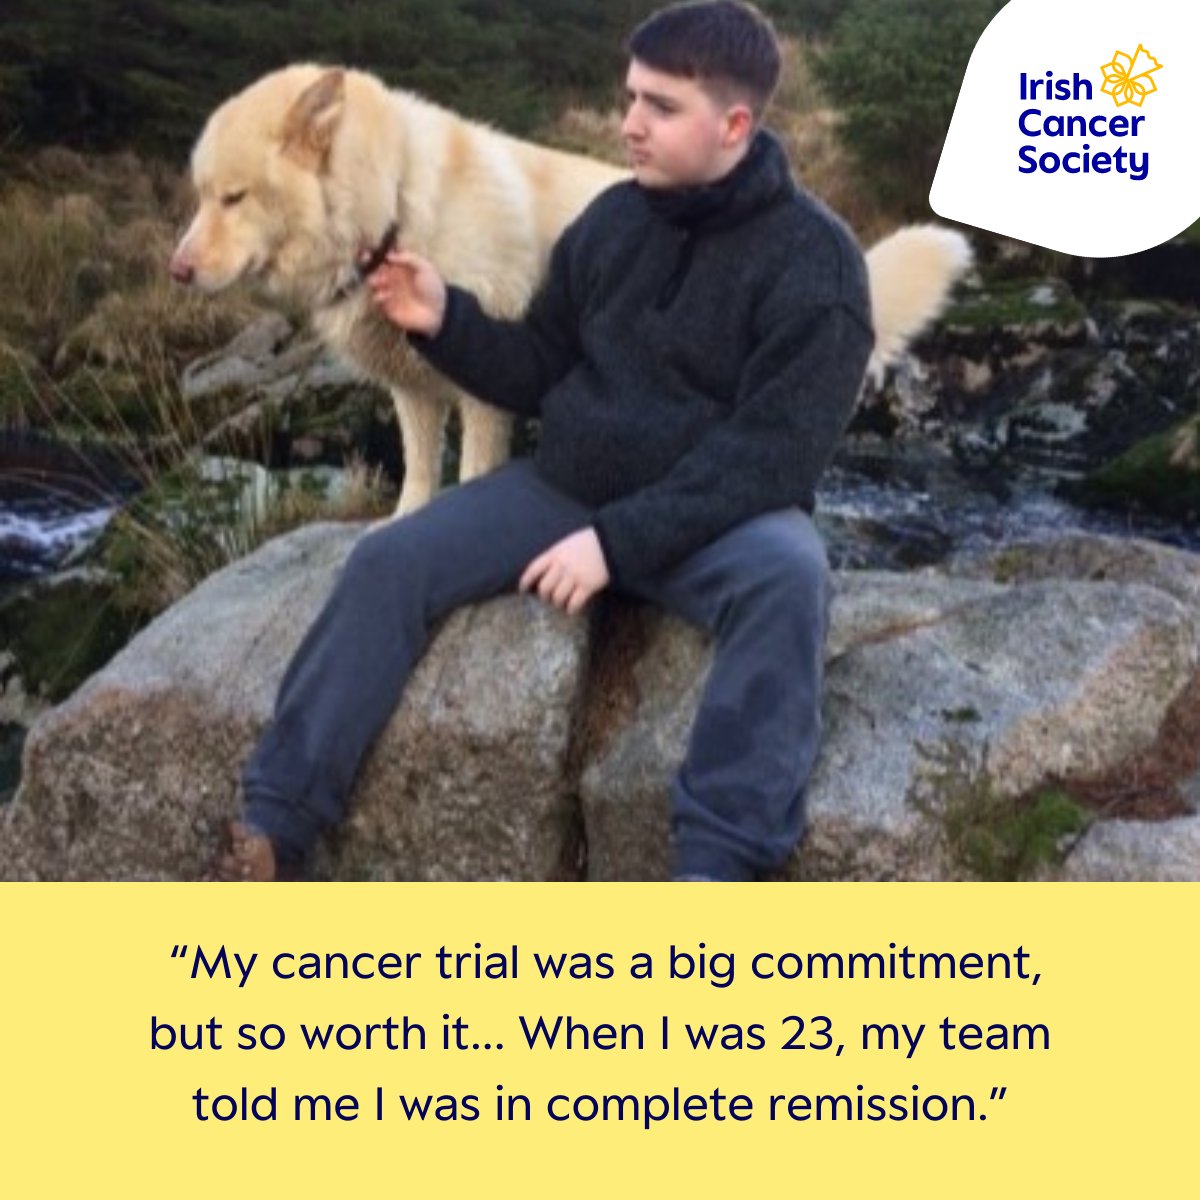 'I would recommend anyone to look into trials as an option, not all trials are suitable for all patients, but it’s definitely worth exploring.”🔬 Today marks International Clinical Trials Day, 29-year-old Sean Ryan from Punchestown shares his story 👉 cancer.ie/about-us/news/…